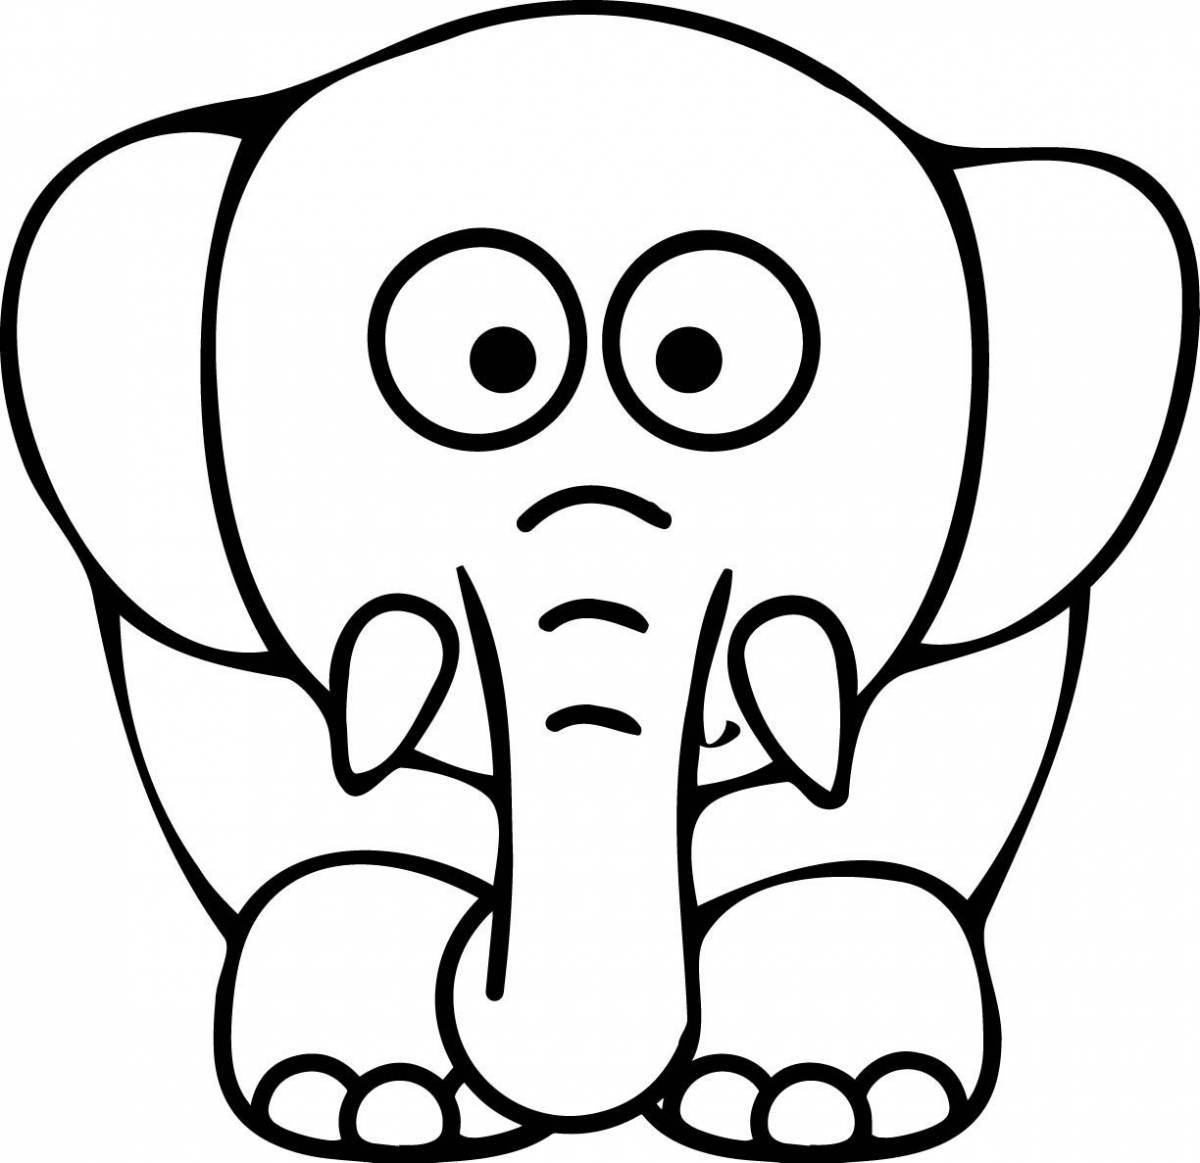 Dynamic elephant coloring for kids